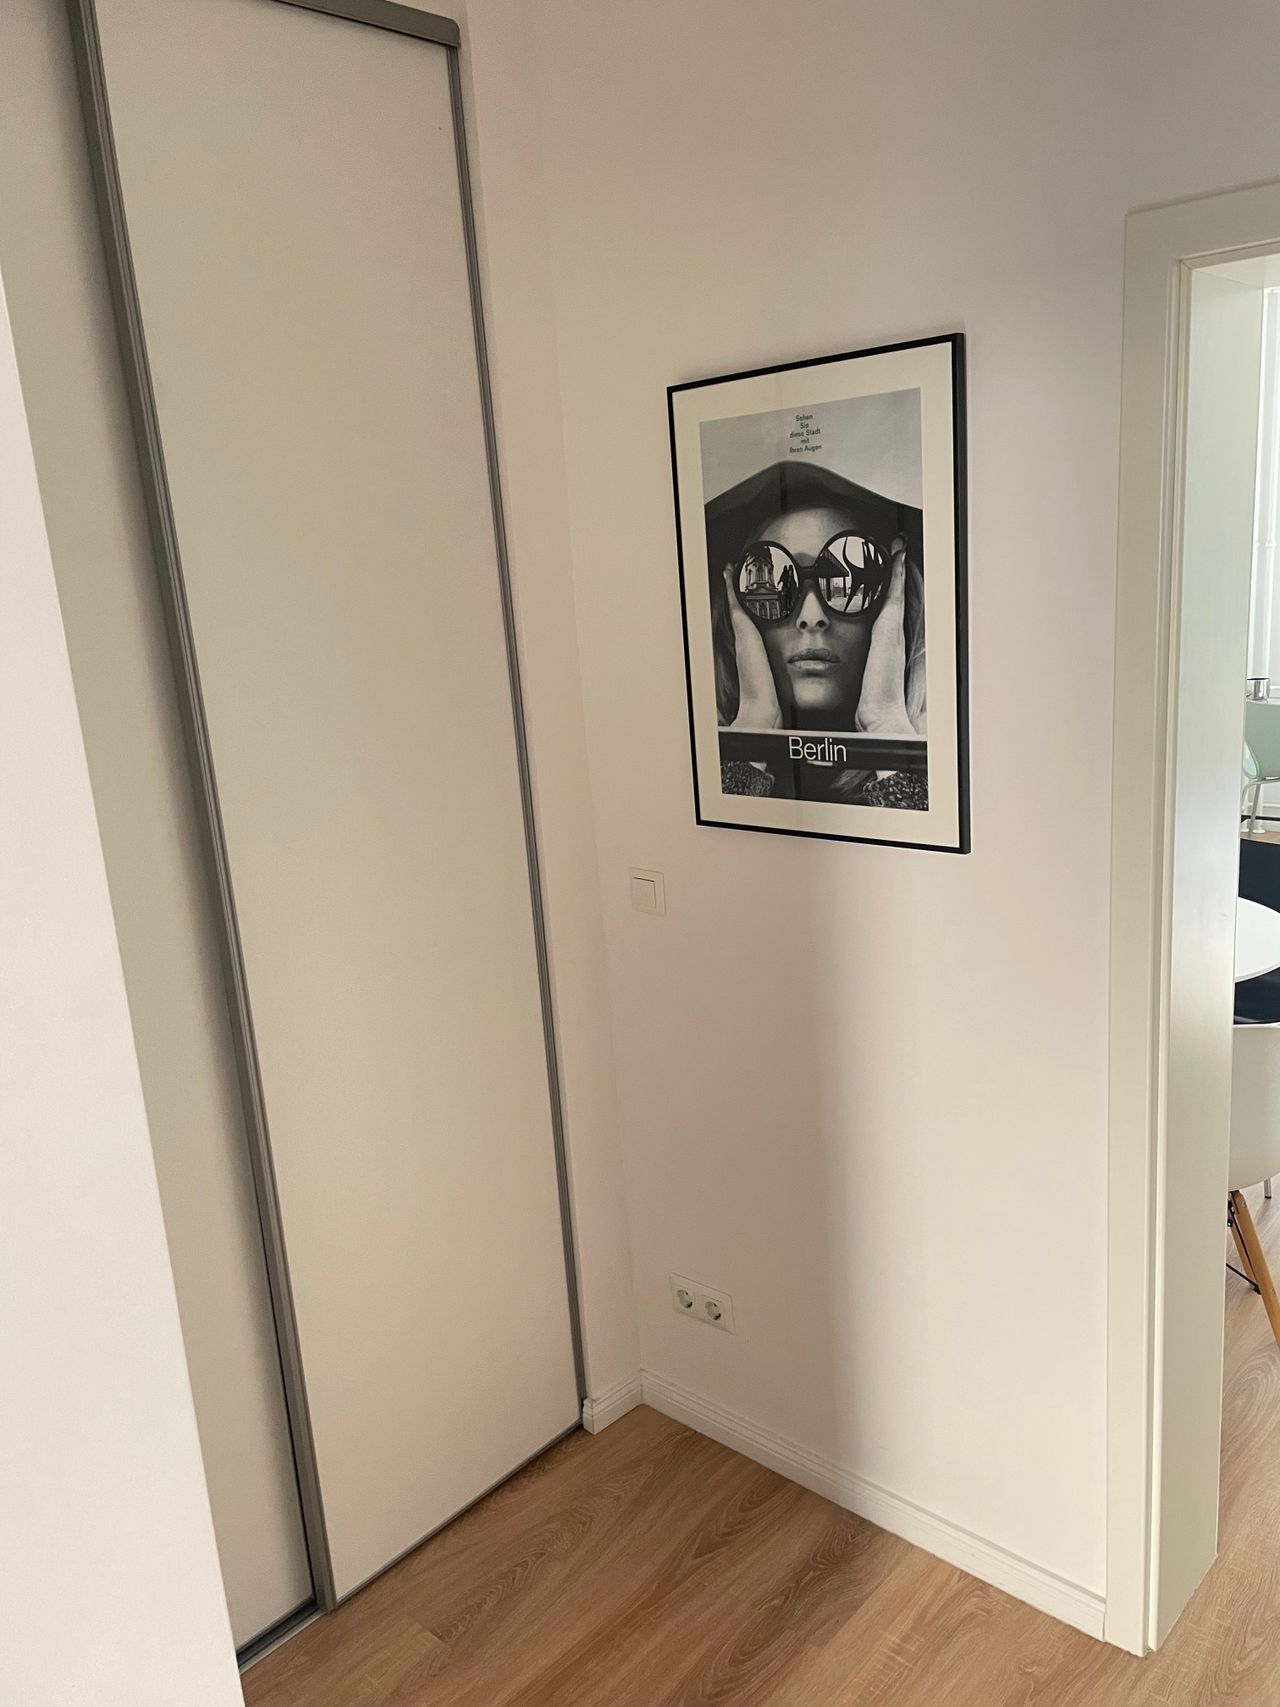 Sunny studio in the heart of the City-West close by KaDeWe and Viktoria Luise Platz